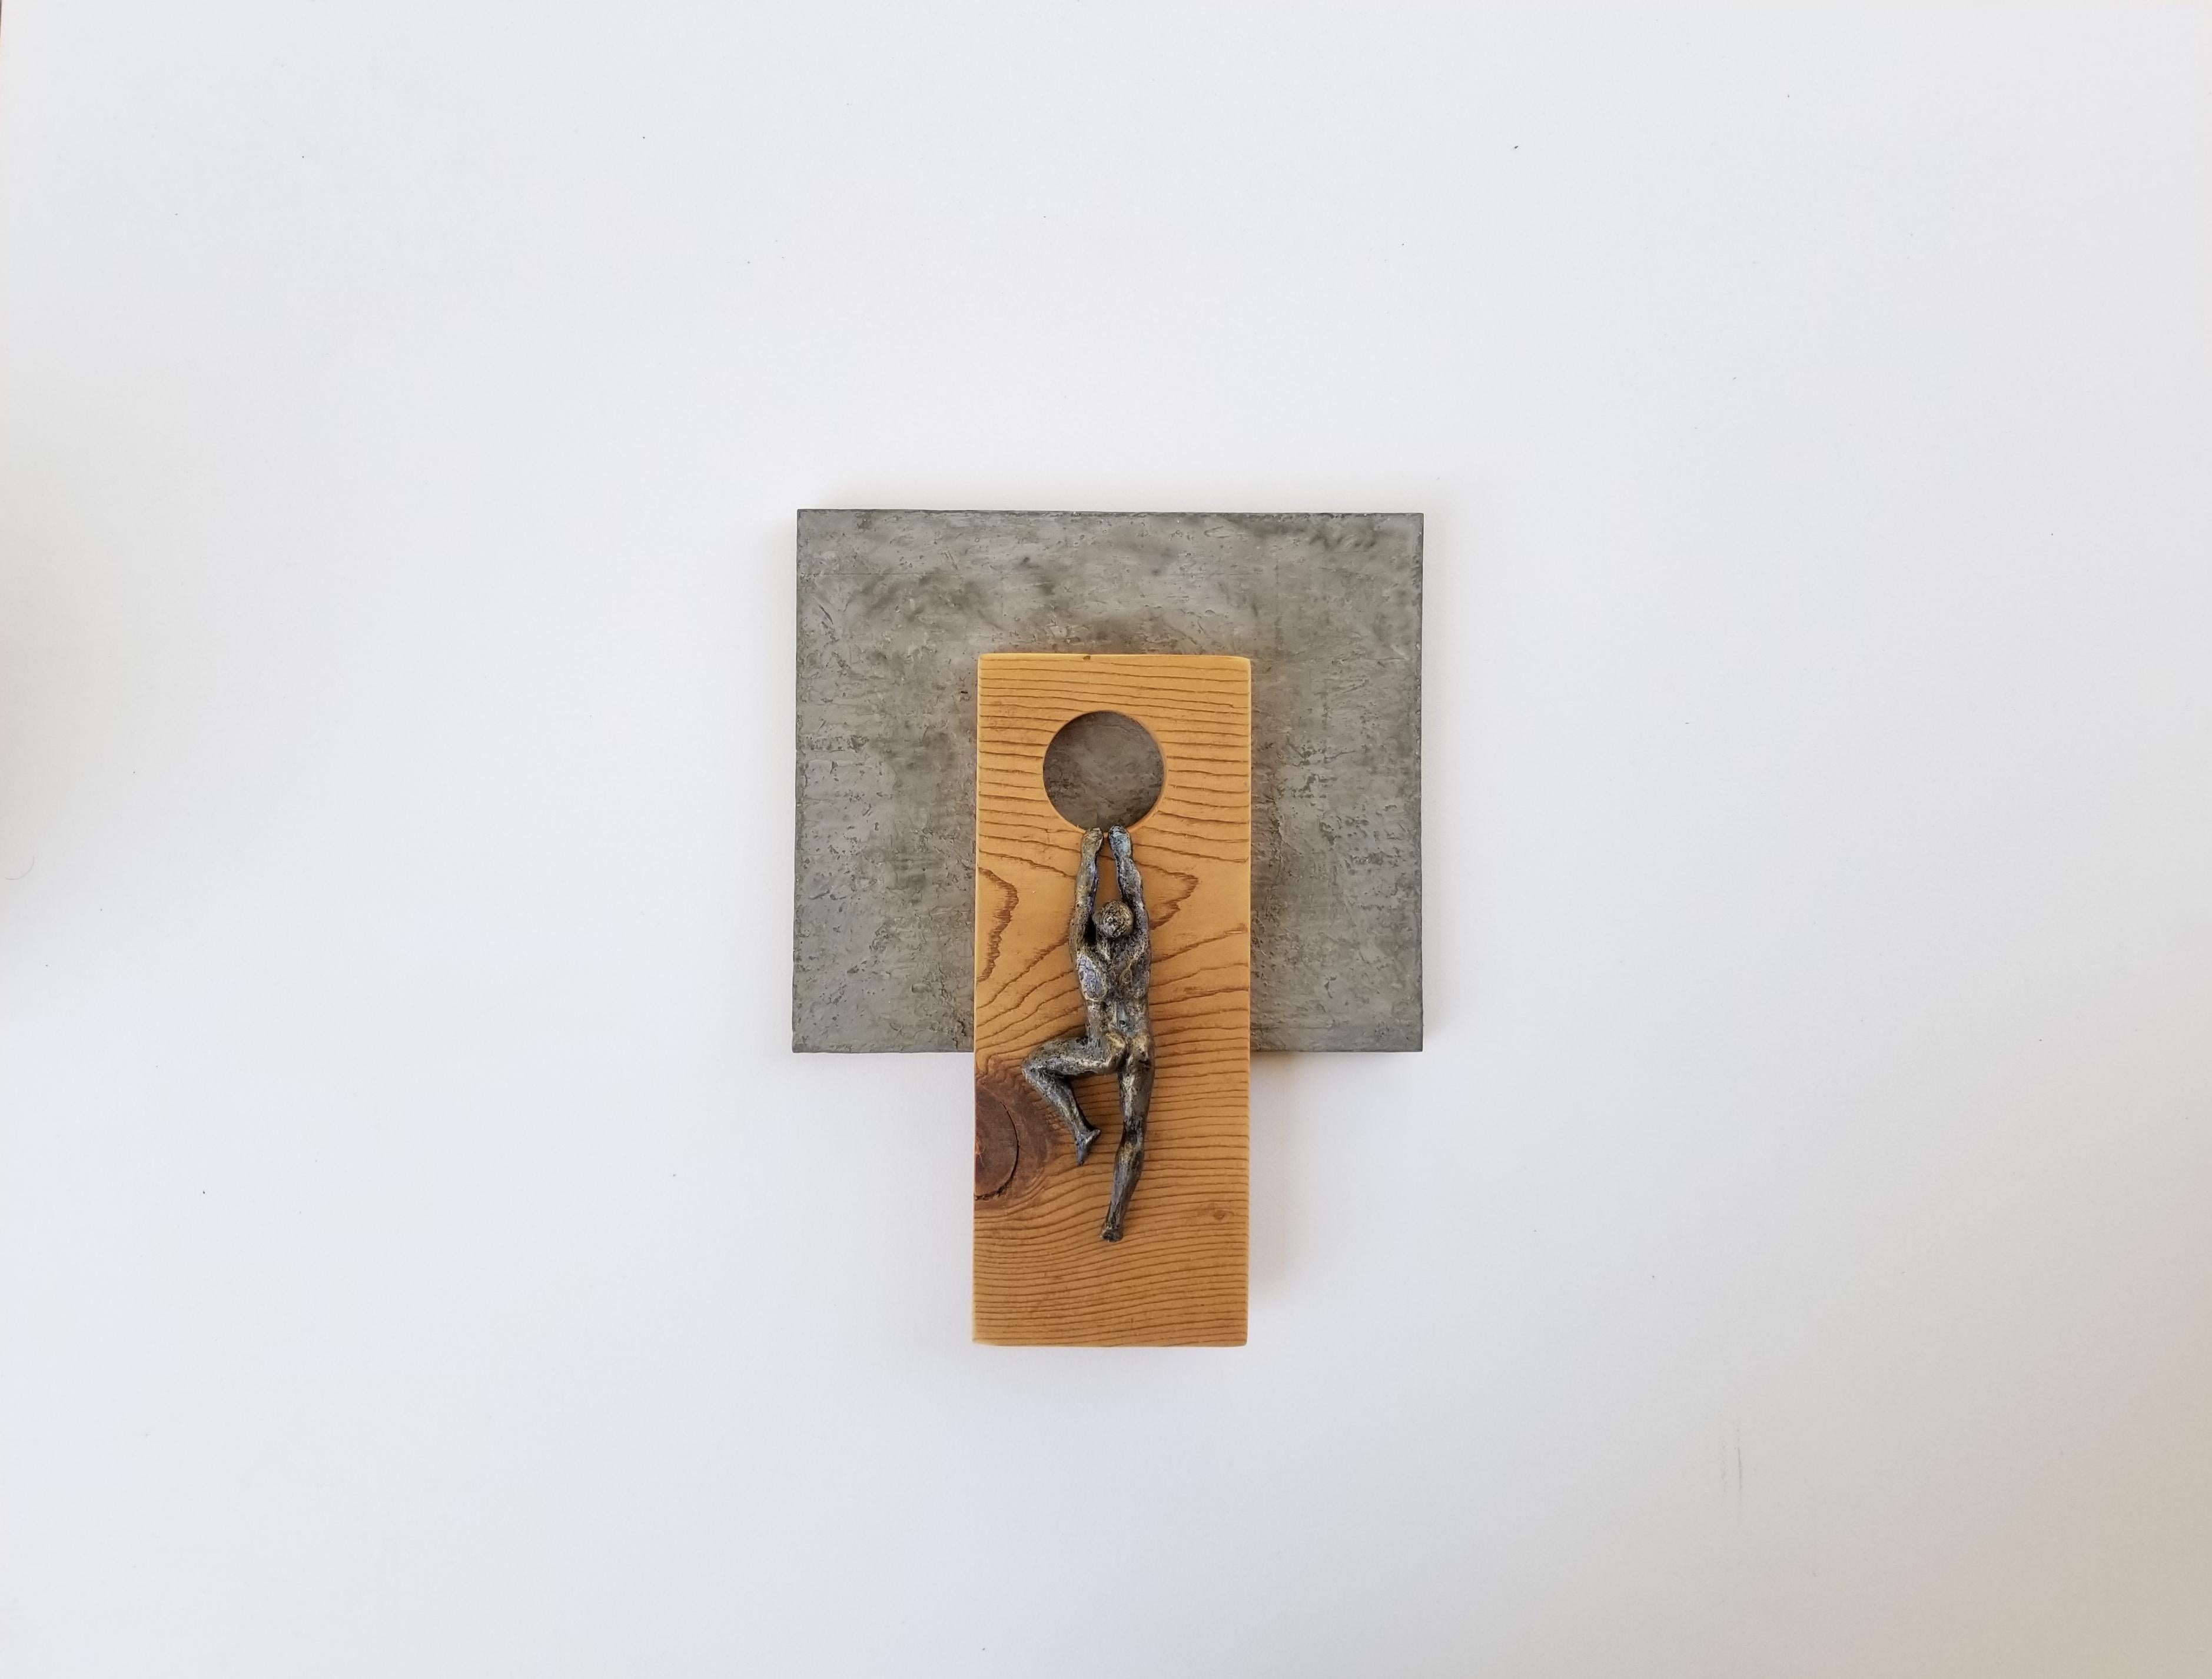 <p>Artist Comments<br>Artist Yelitza Diaz presents a nude figure hanging from a wooden module. Part of her Climbers series depicting people ascending geometric wooden cutouts. Yelitza offers the piece with neutral colors and virgin wood for a